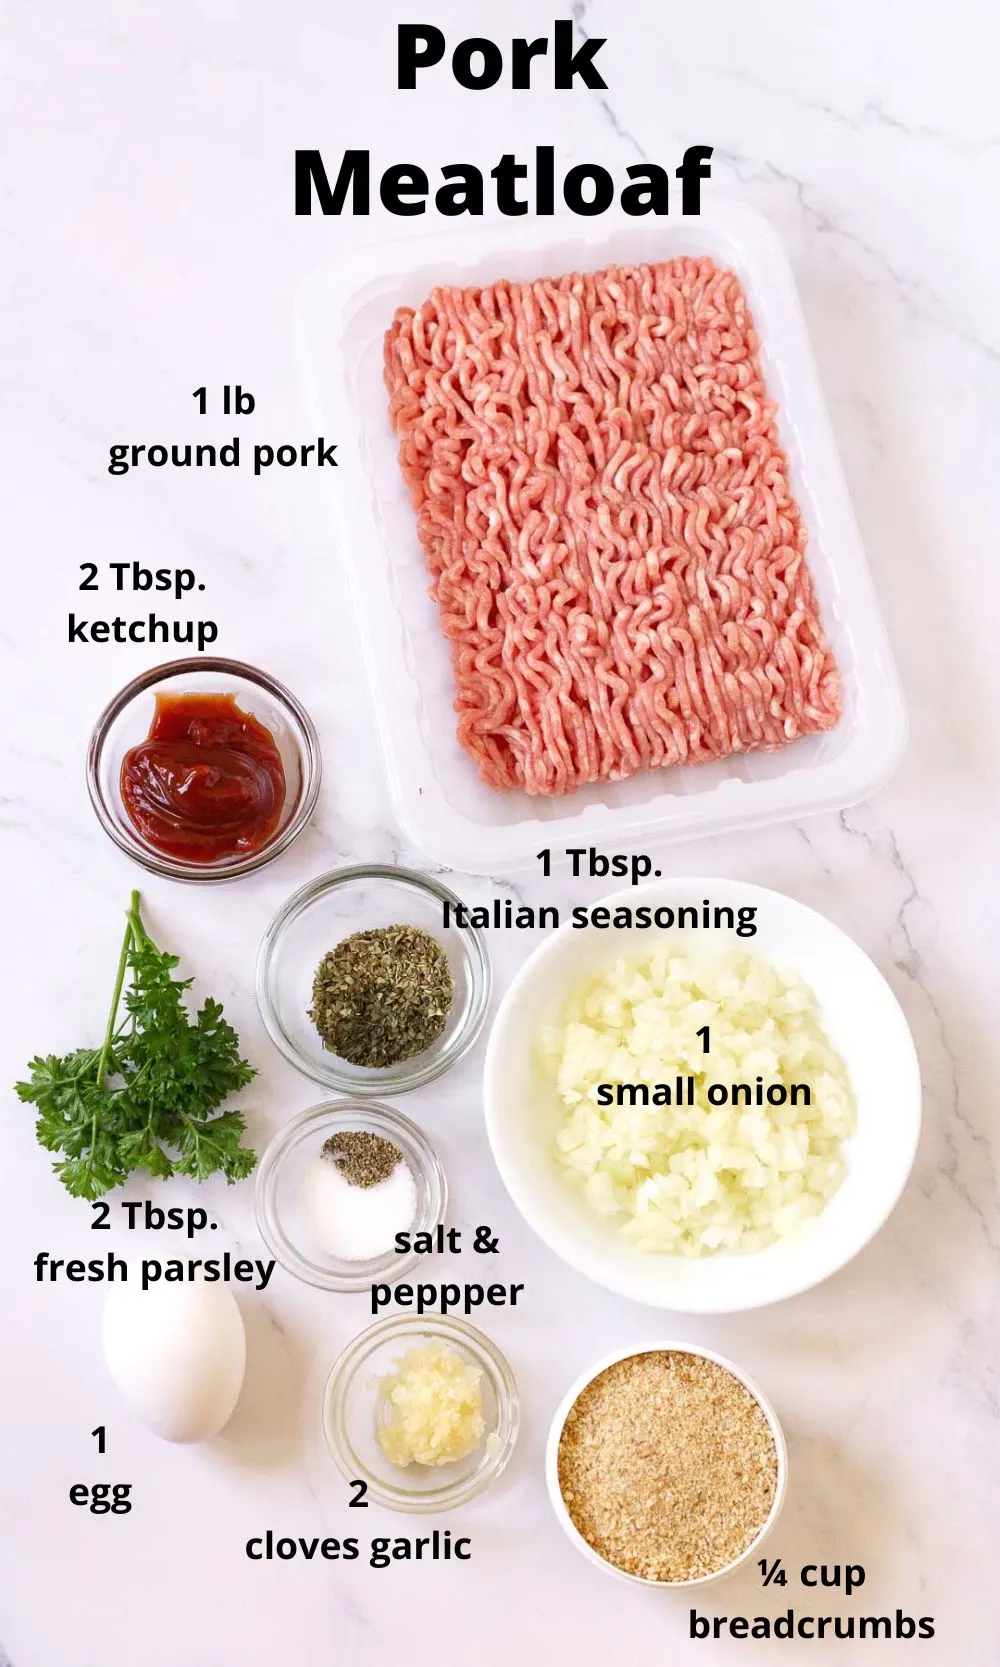 Ingredients for ground pork meatloaf laid out